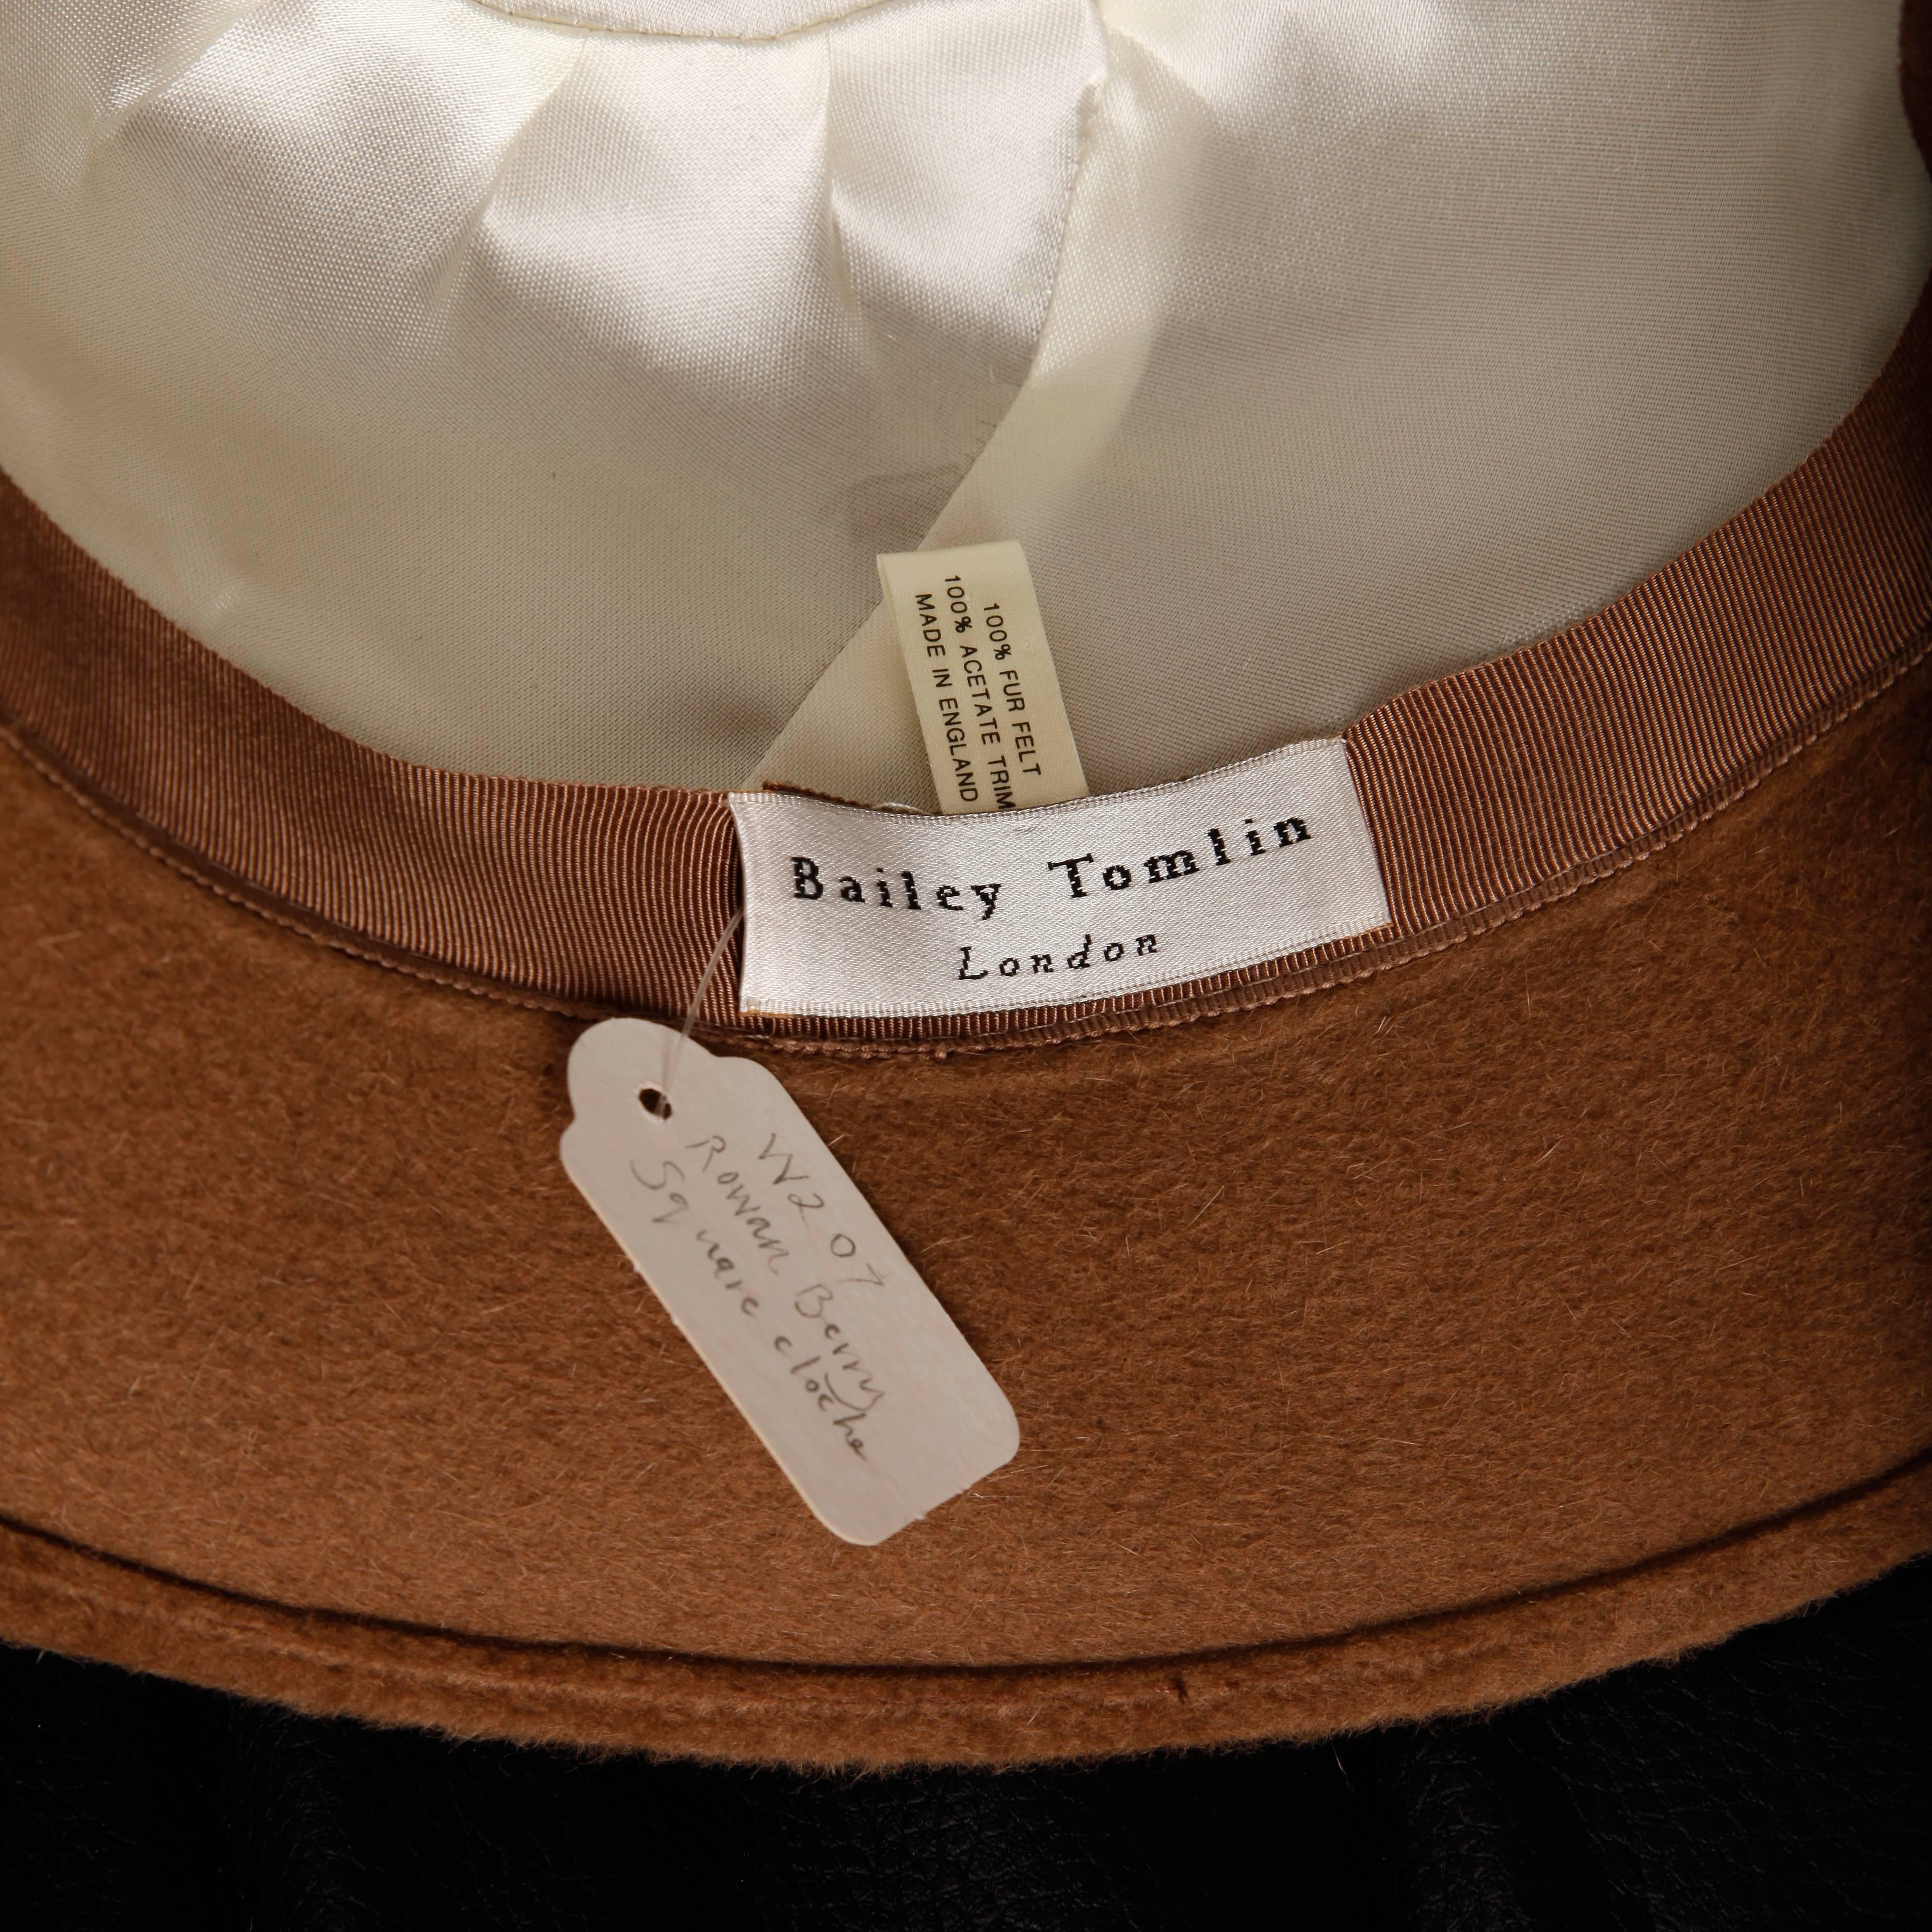 Unworn with the original tags still attached! This is a deadstock piece that came from the stock of an old hat store located in Southern California. We have access to the entire inventory of over 3000 unworn vintage hats. Made in England by designer